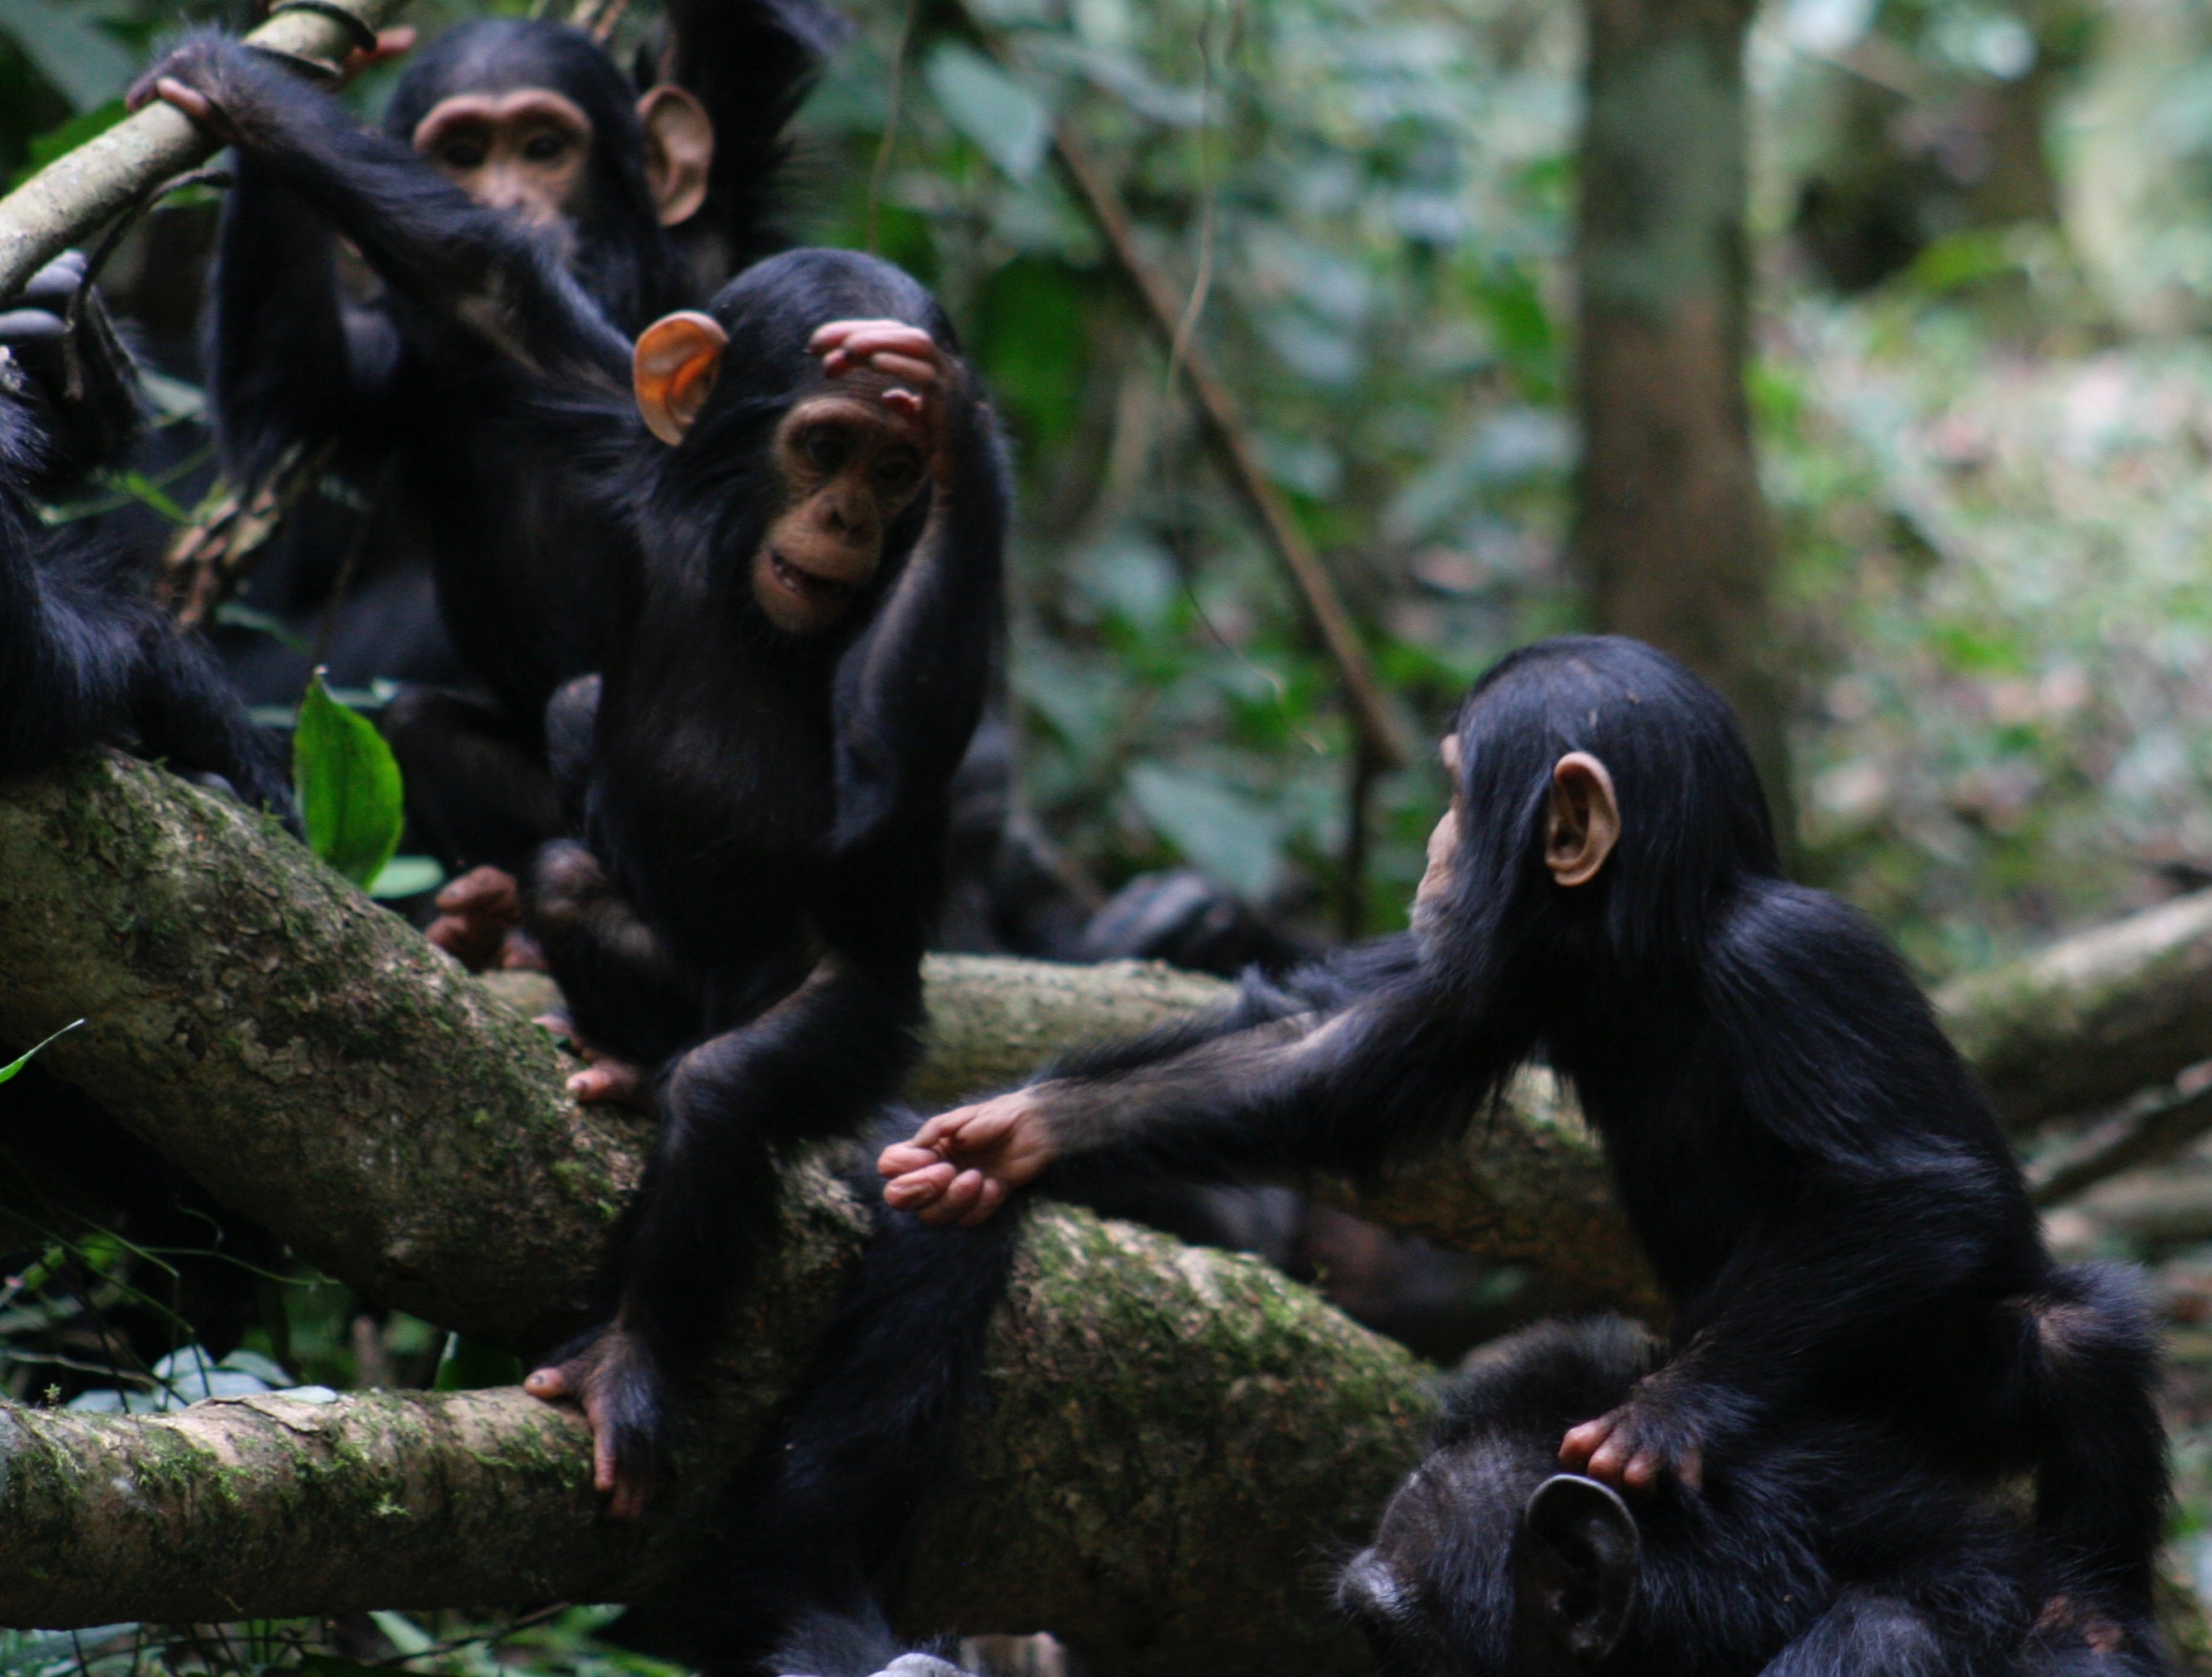 Chimpanzees use lots of different gestures to communicate, like this “reach” which they usually use to ask for food. Participants selected the right meaning for the reach gesture and were overall able to understand ape gestures. Catherine Hobaiter (CC-BY 4.0, https://creativecommons.org/licenses/by/4.0/)